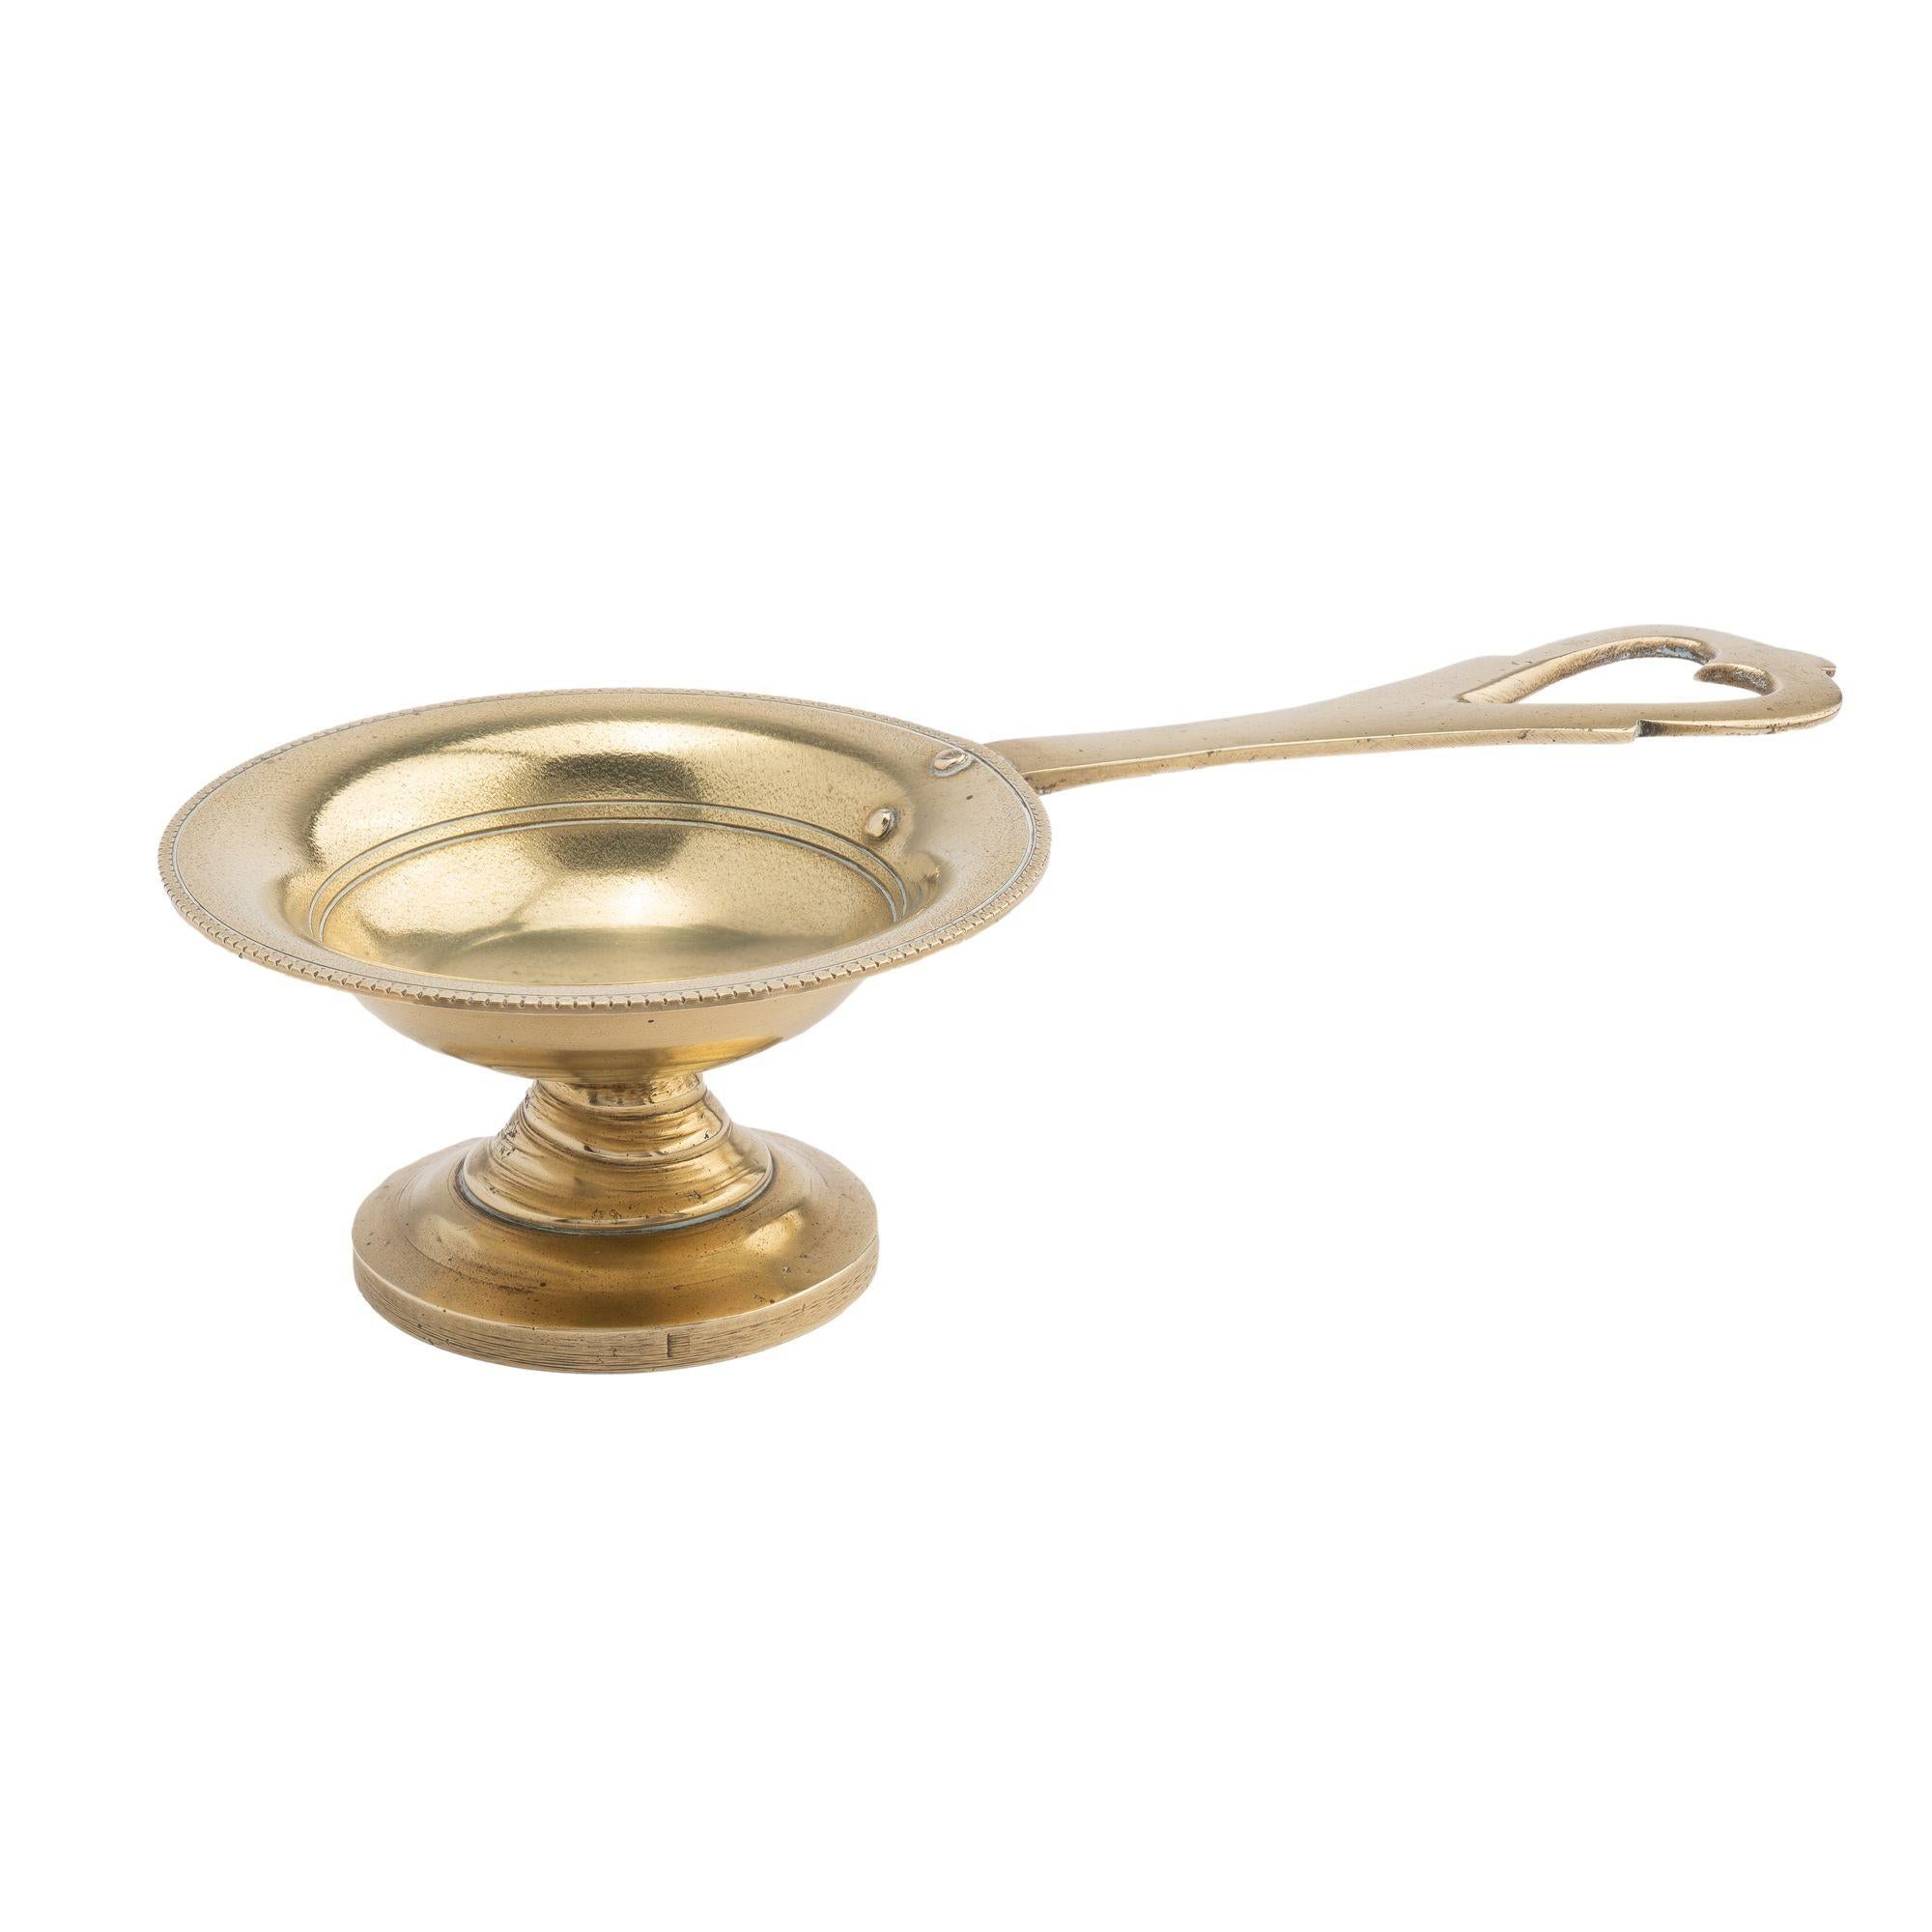 Shallow circular cast brass taster dish with beaded edge on a circular pedestal base. The flaring rim is rivet mounted with a long handle pierced with a heart shape at the terminal.
English, fourth quarter 1700’s.